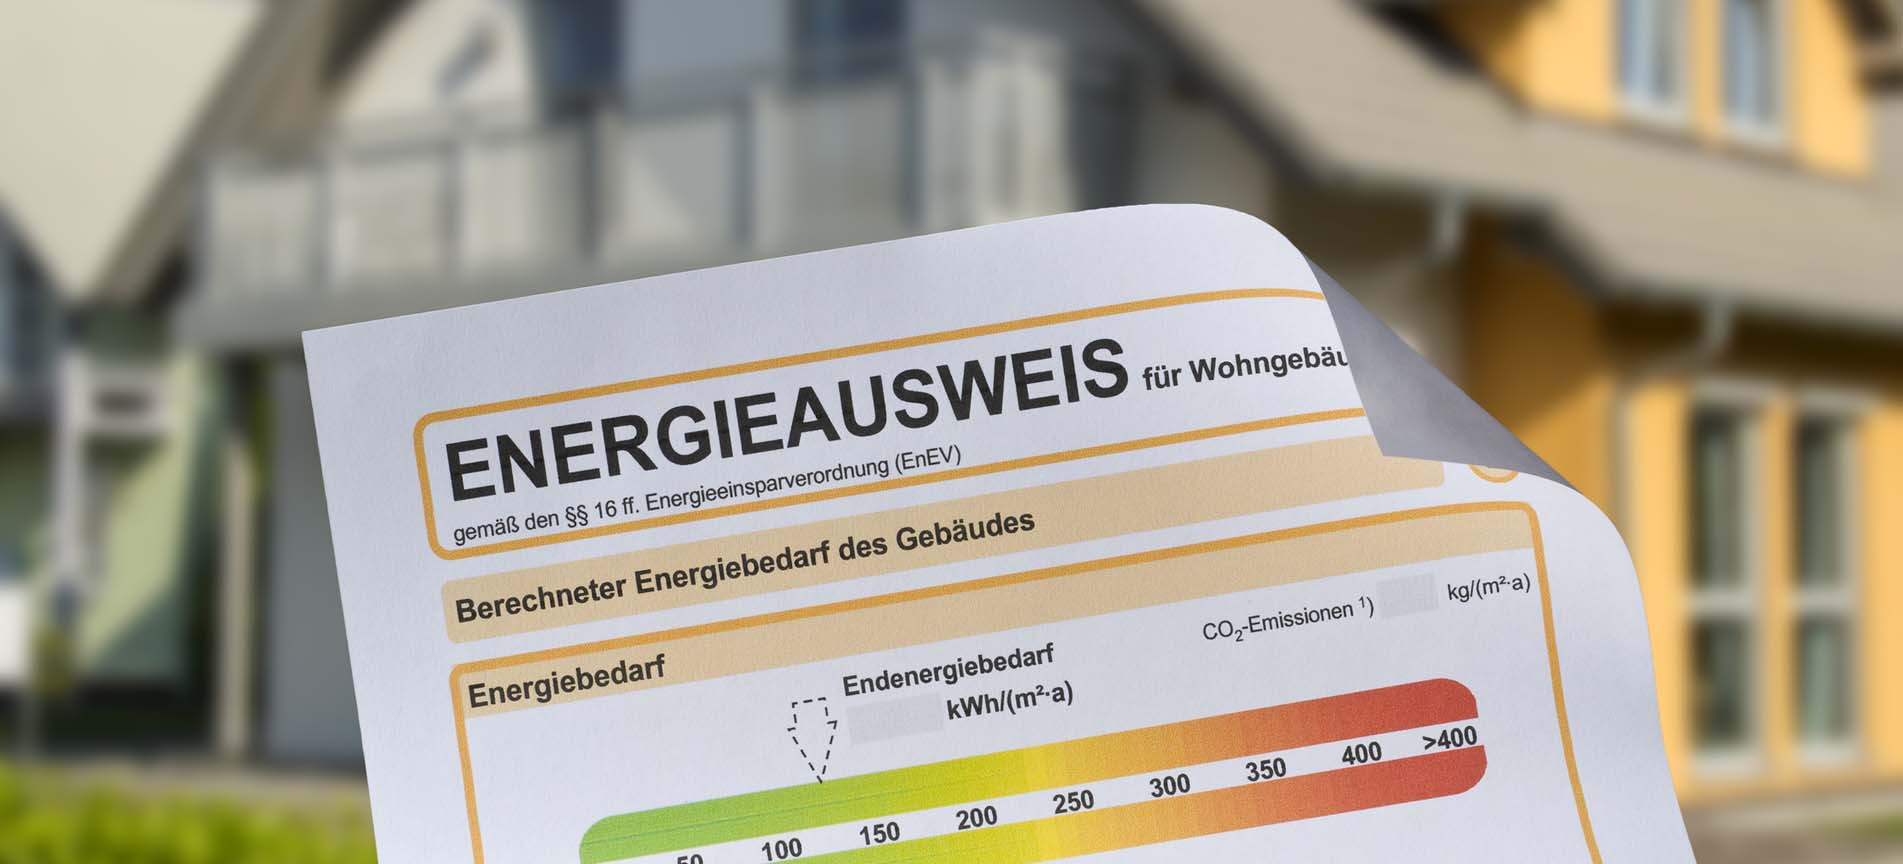 Energieausweis Immobilie